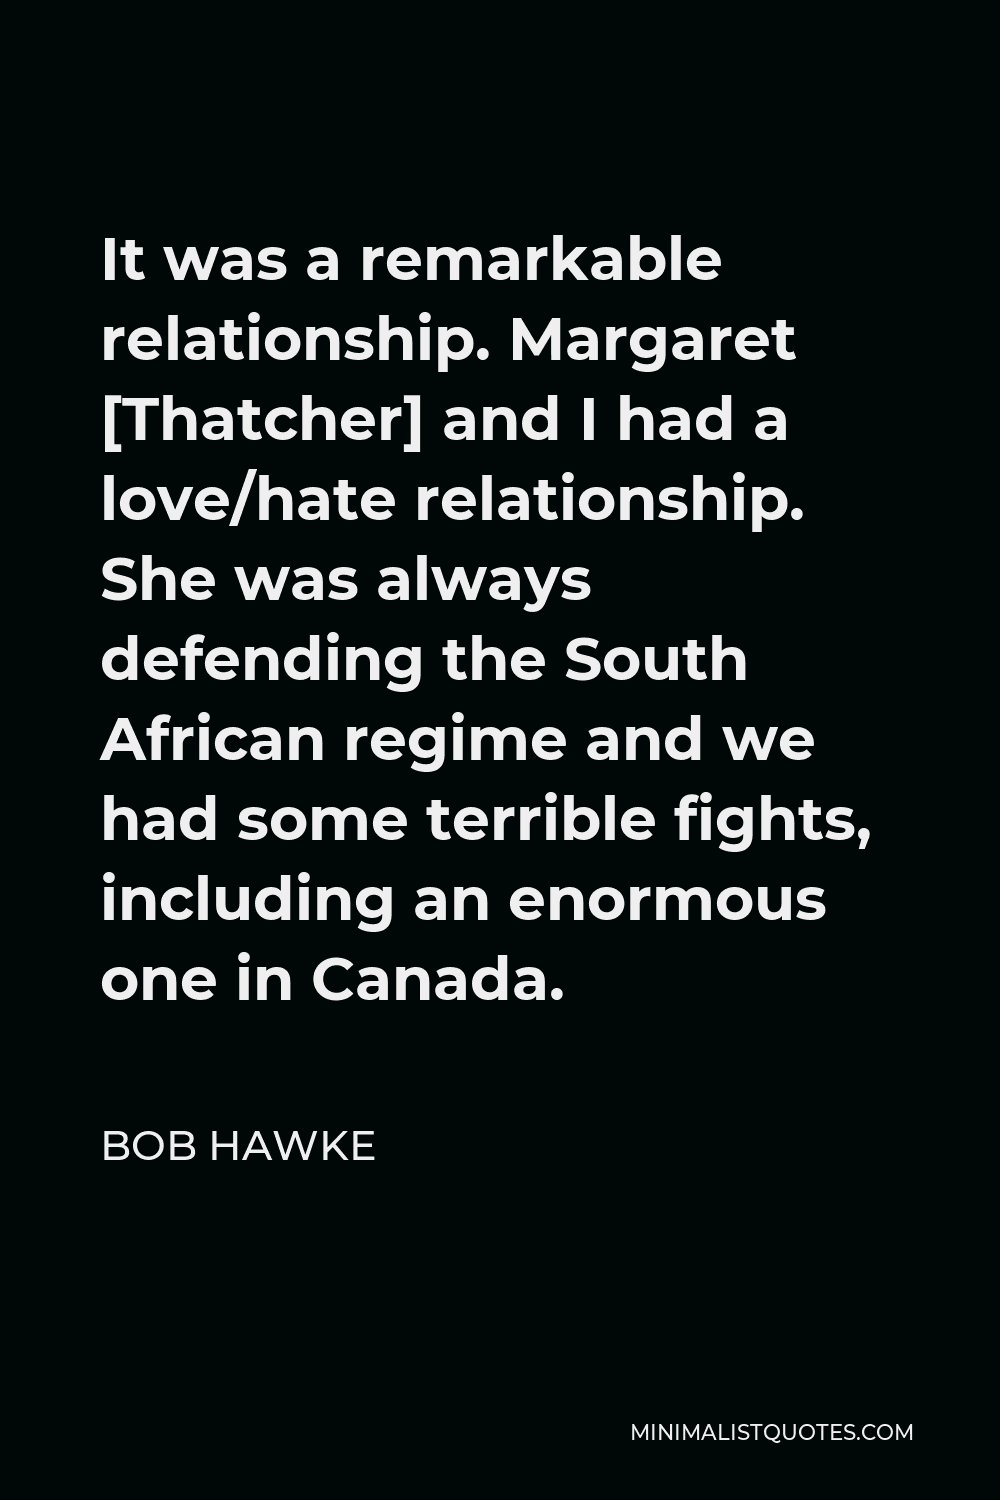 Bob Hawke Quote - It was a remarkable relationship. Margaret [Thatcher] and I had a love/hate relationship. She was always defending the South African regime and we had some terrible fights, including an enormous one in Canada.